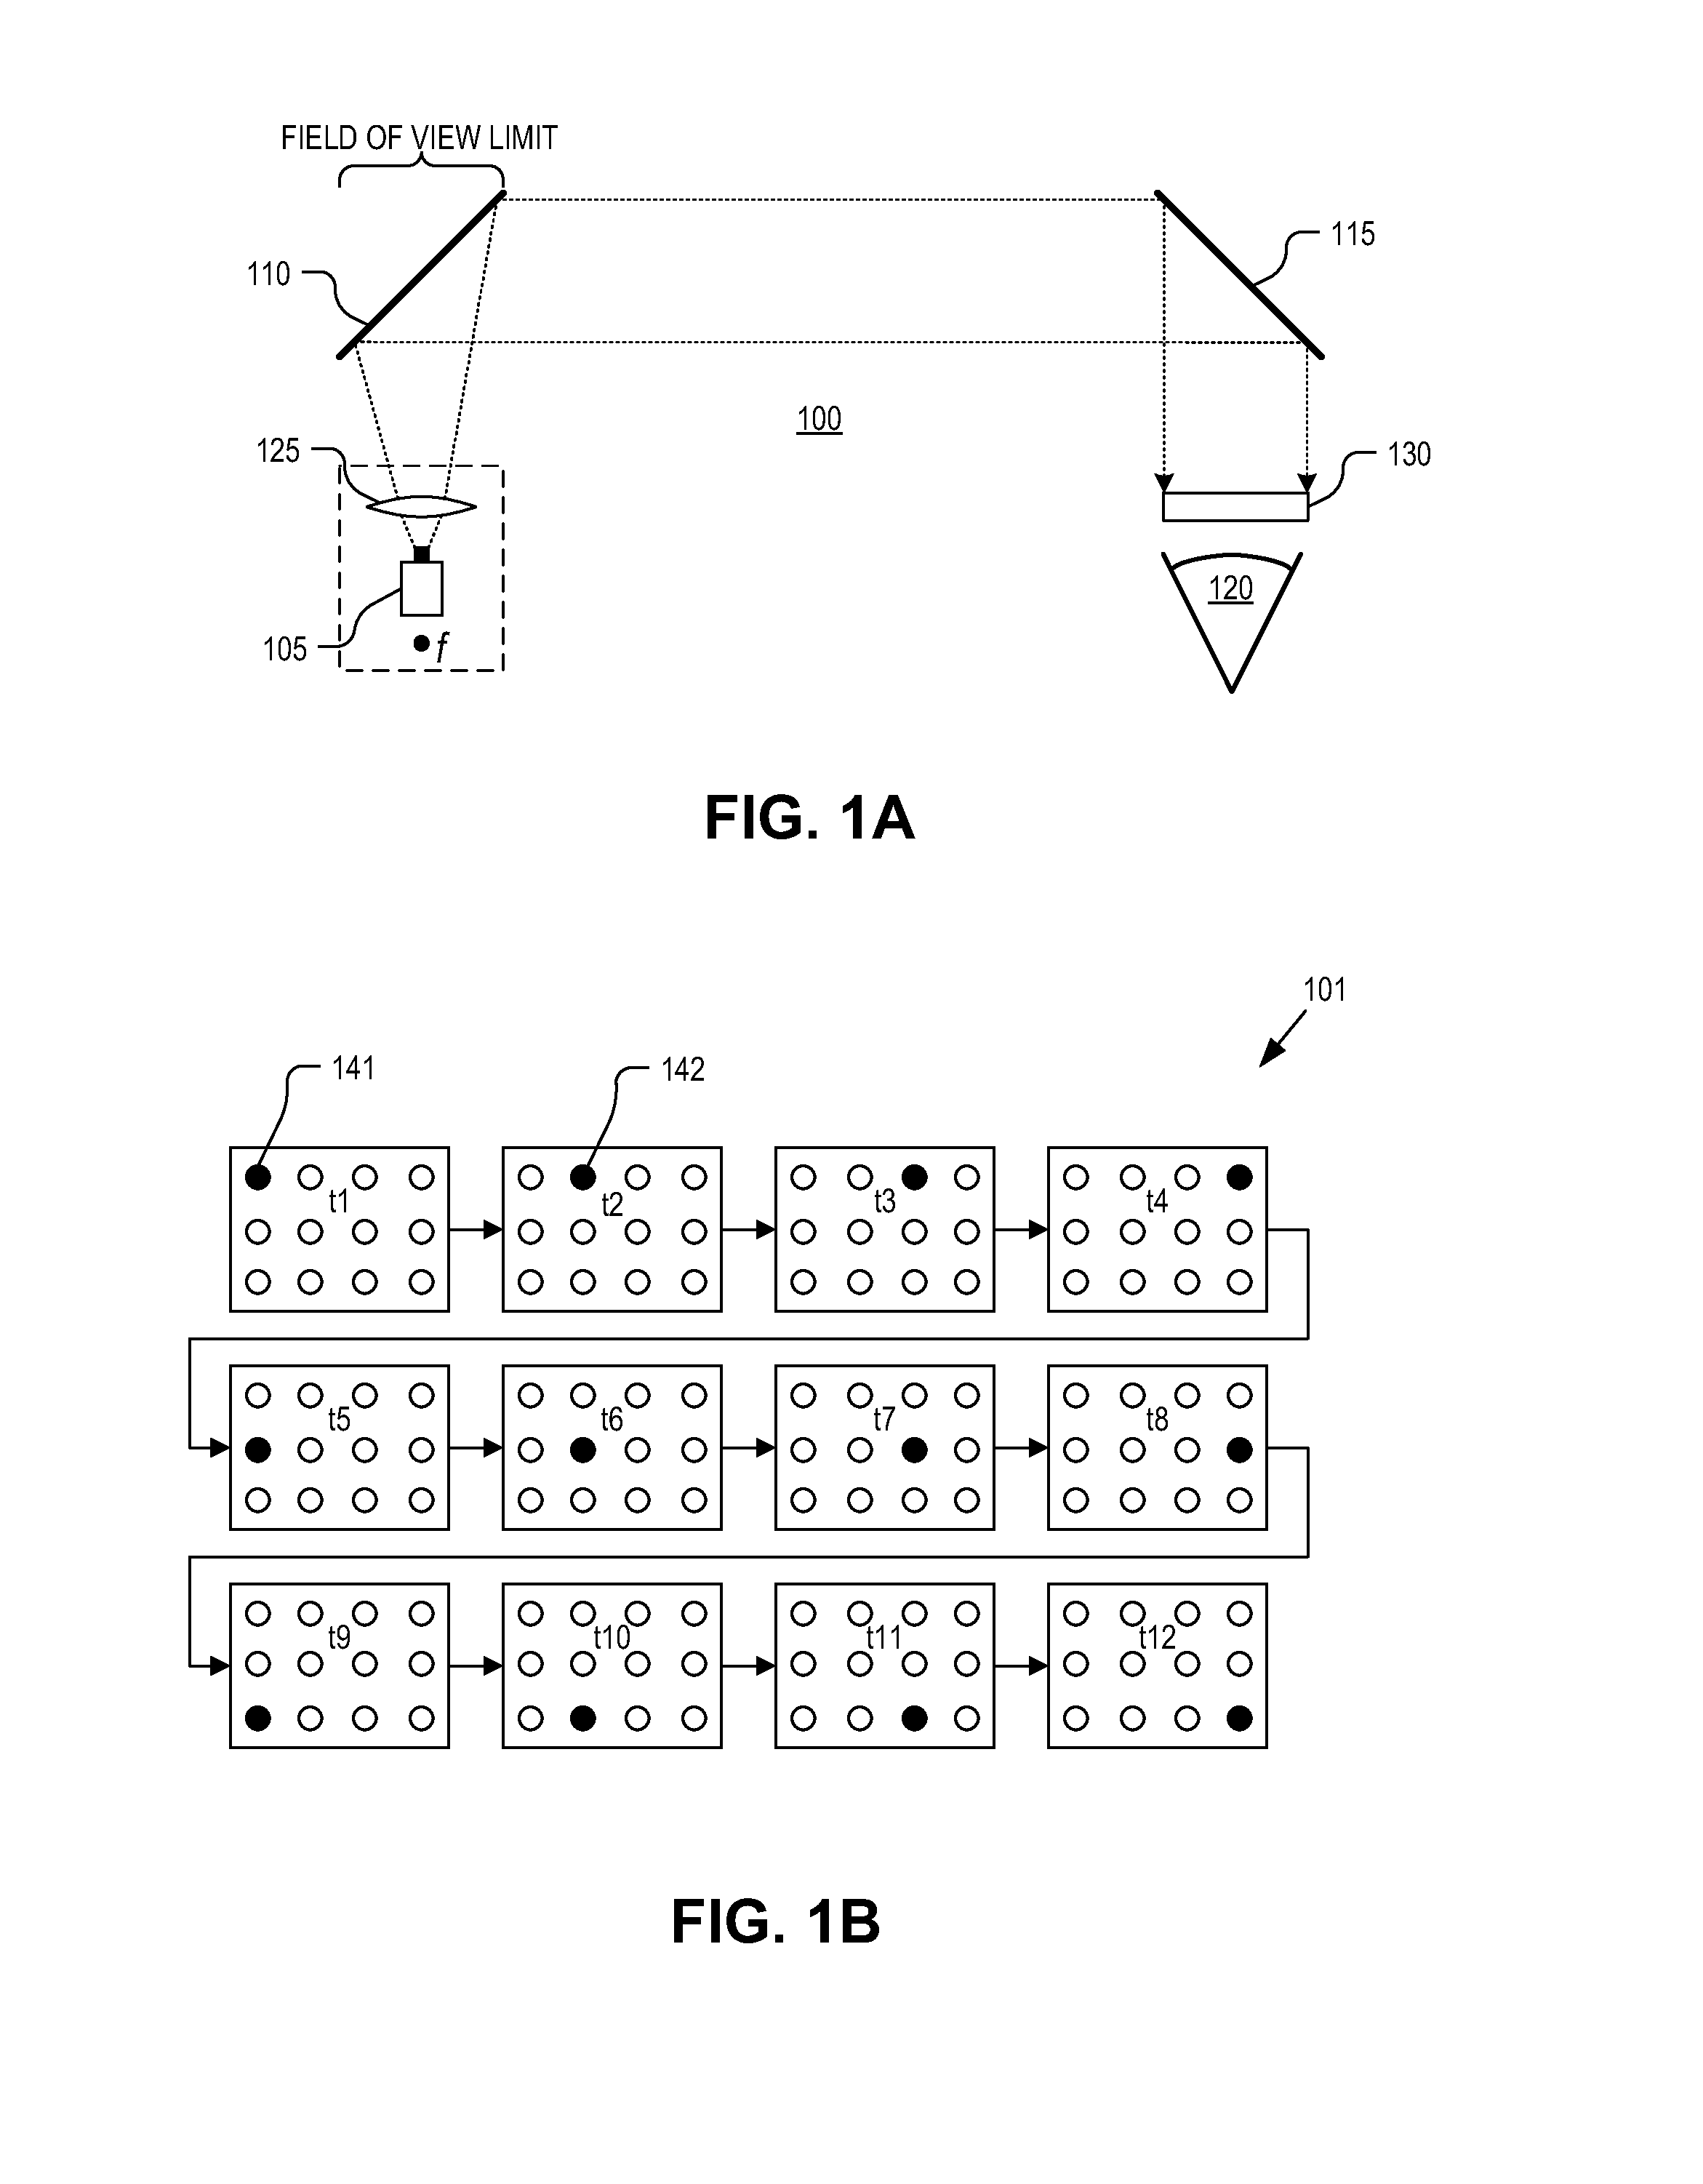 Whole image scanning mirror display system